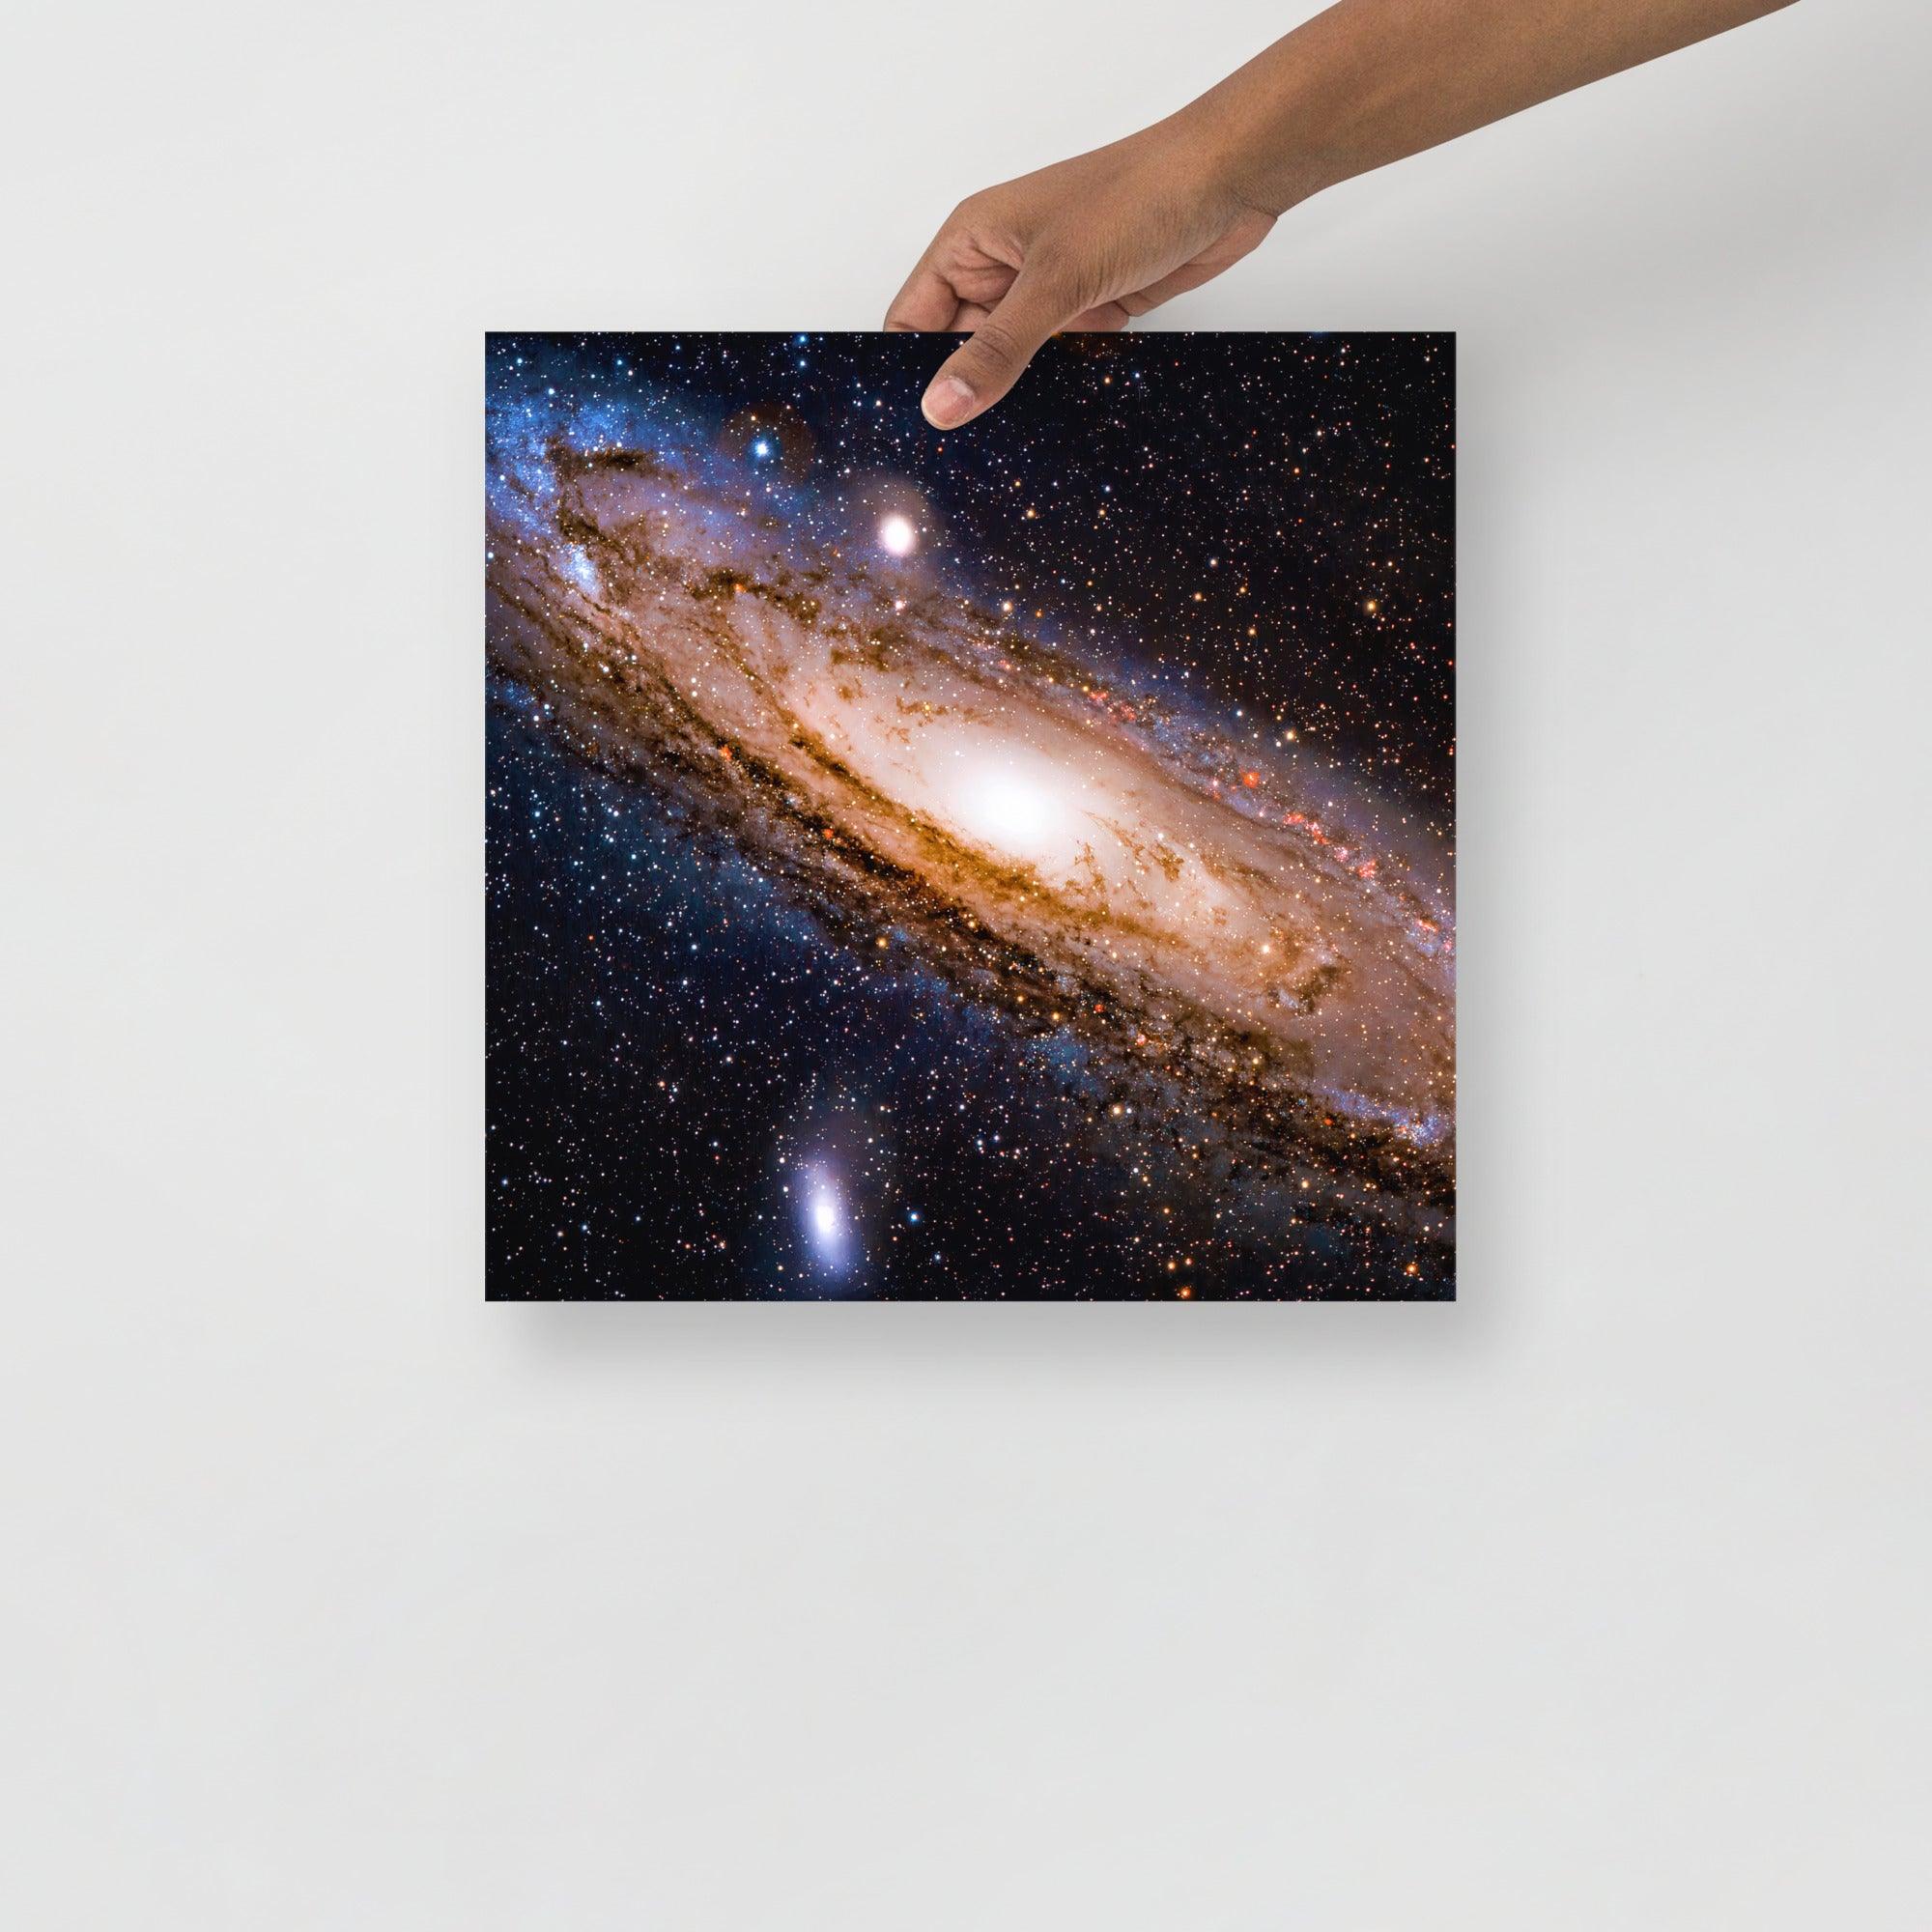 An Andromeda Galaxy poster on a plain backdrop in size 14x14”.